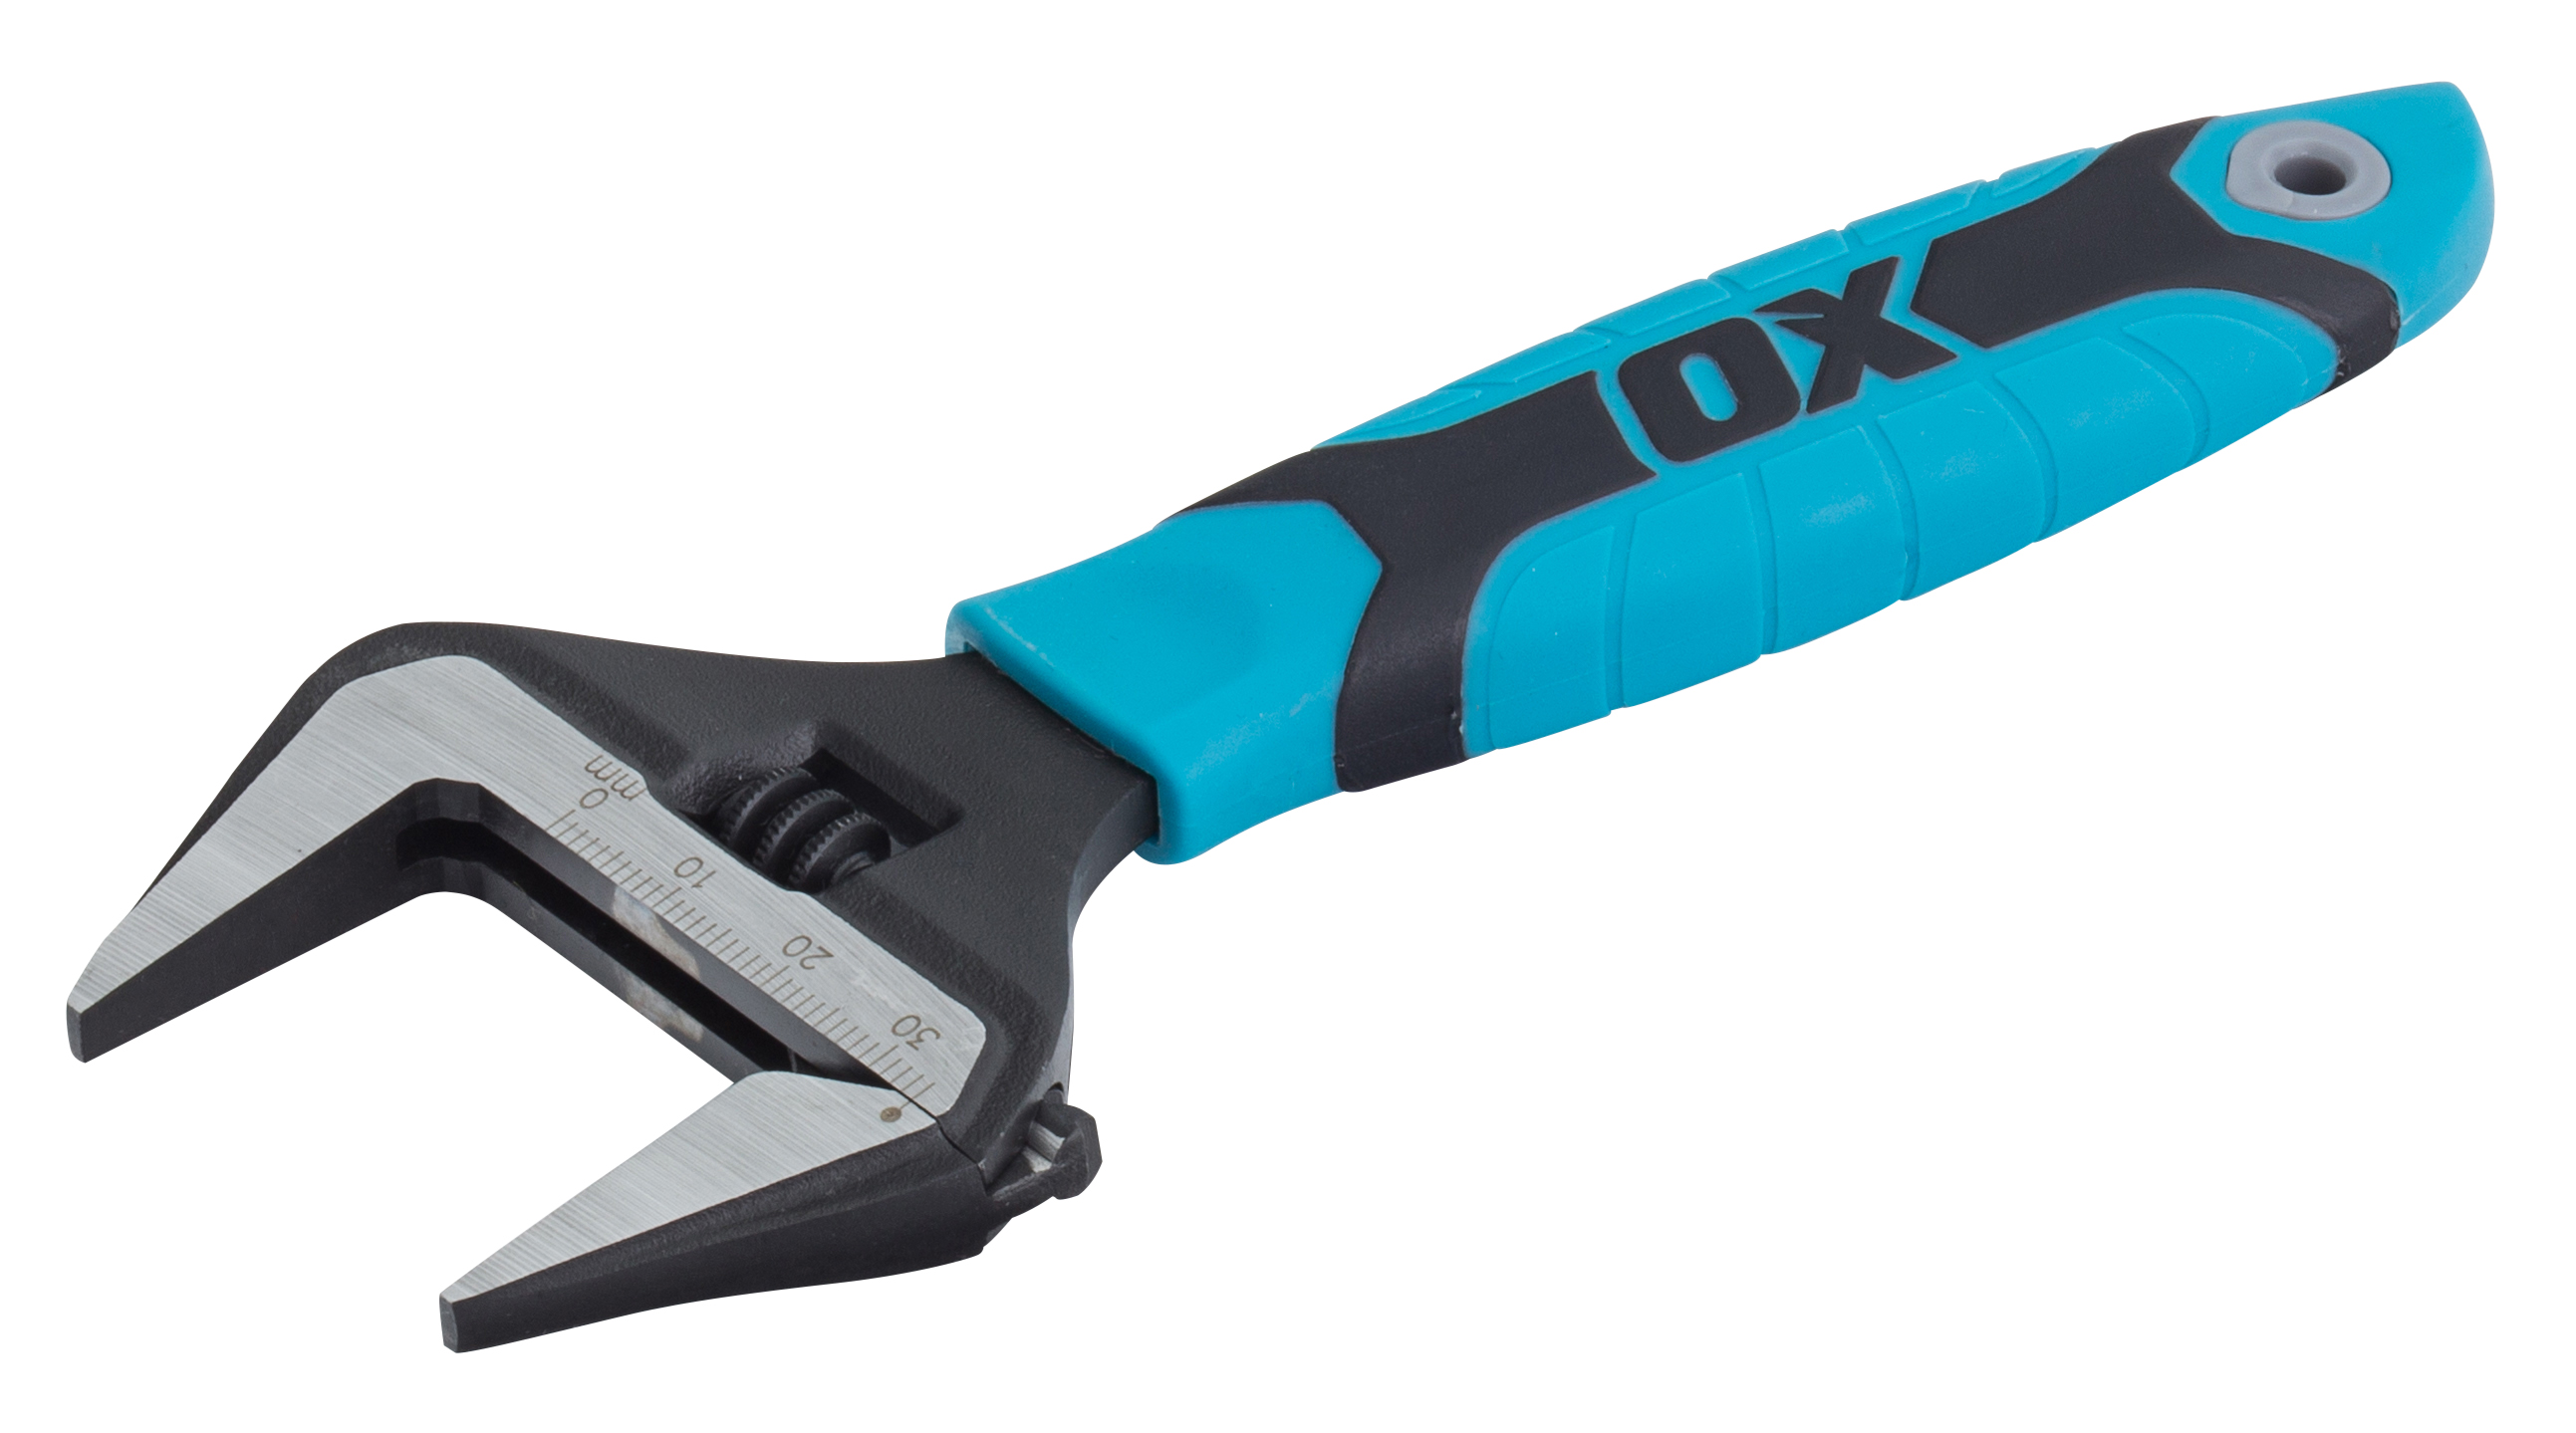 OX Pro Series Adjustable Wrench Extra Wide Jaw 6” (150mm)